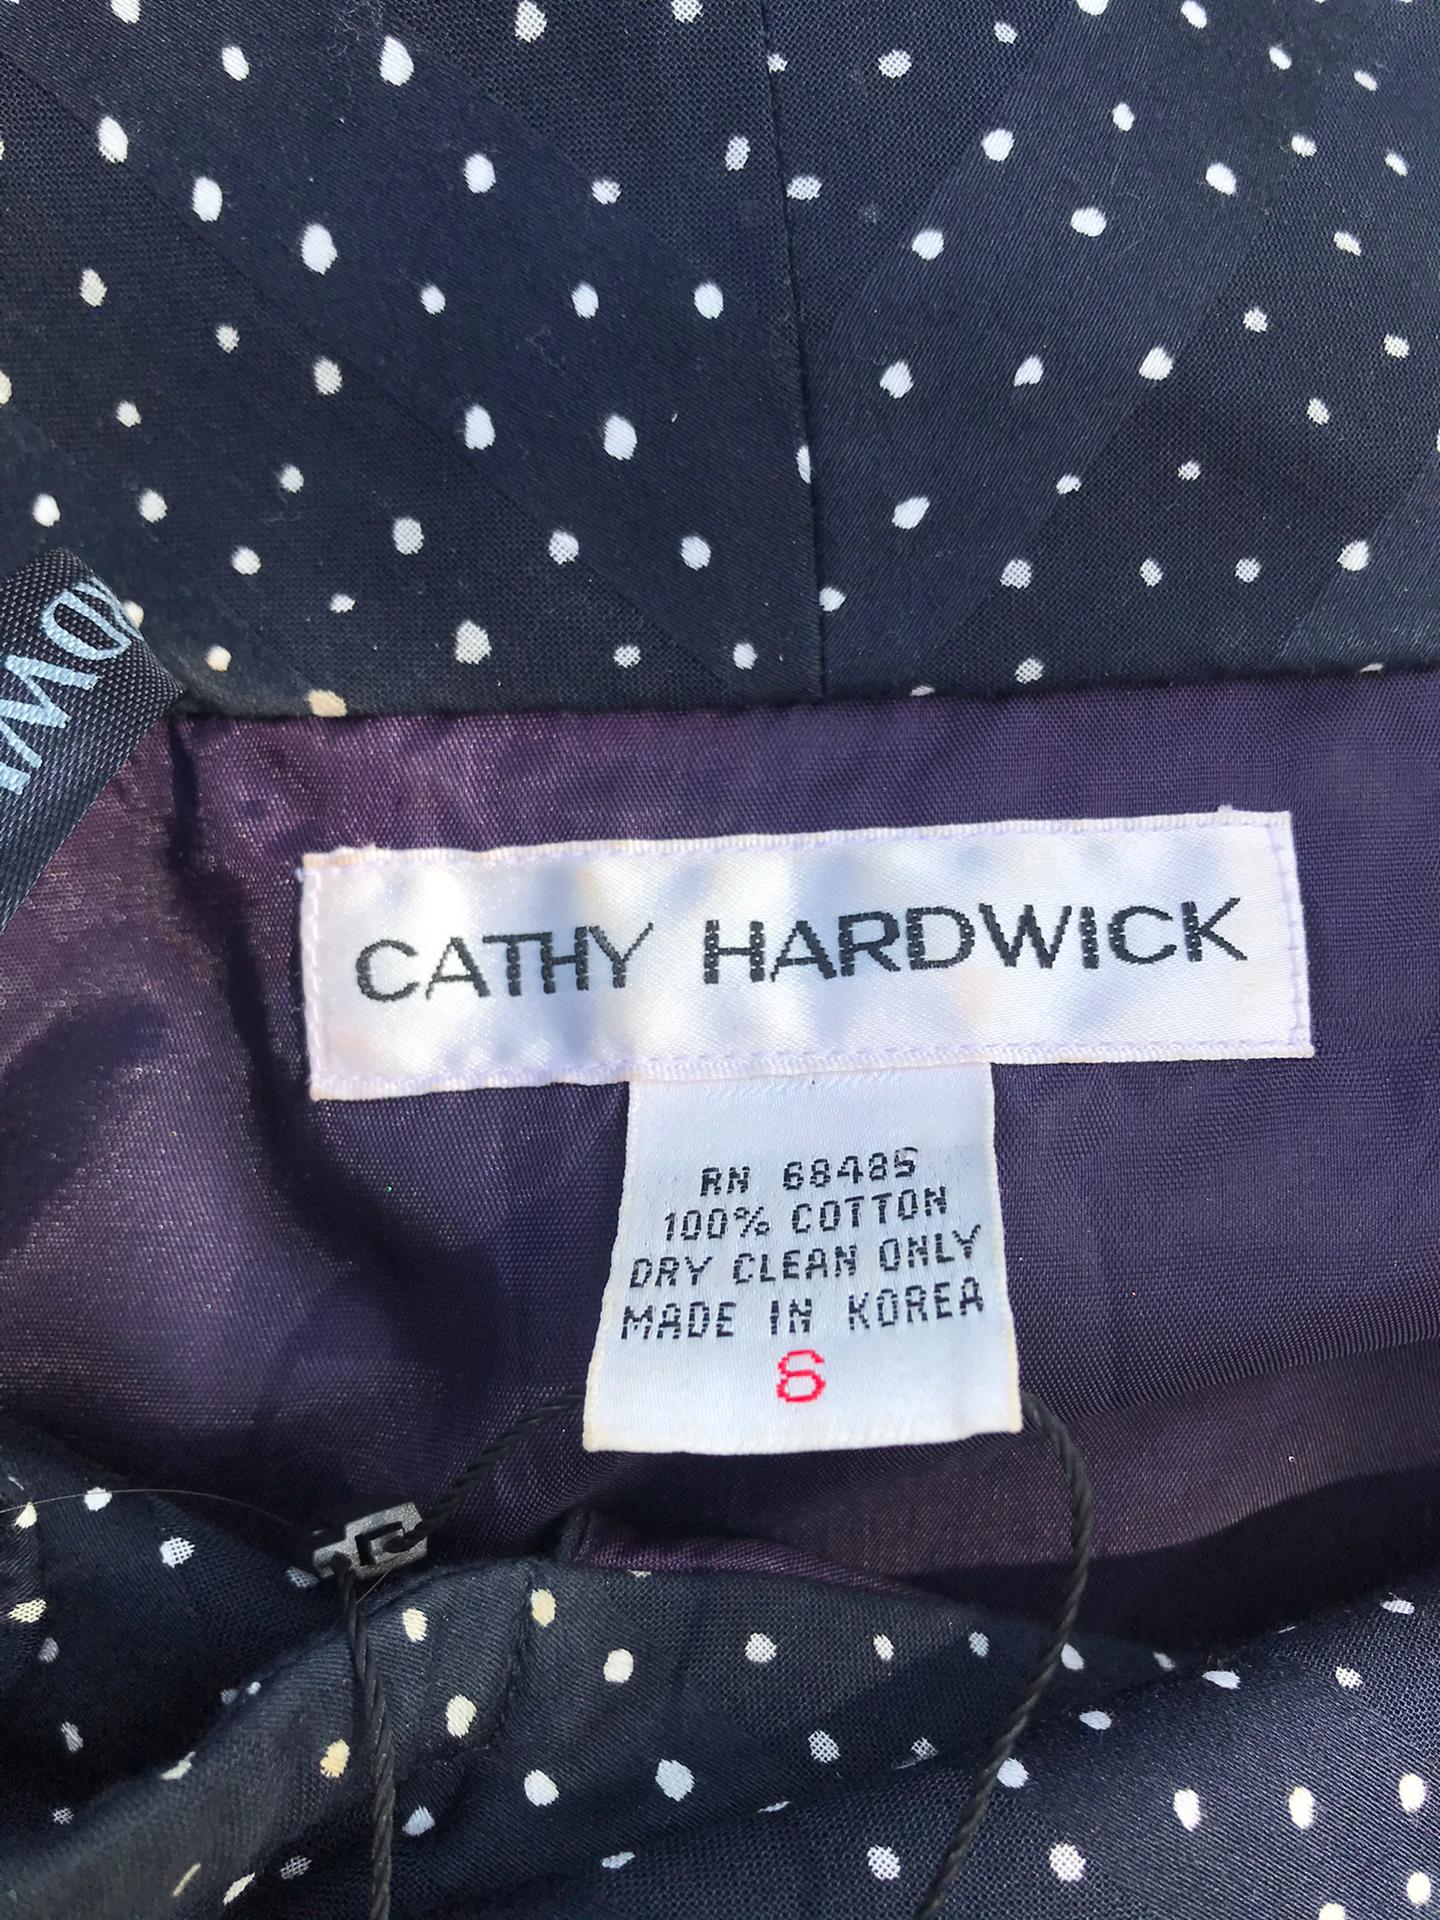 90's cotton Cathy Hardwick polkadot dress with bare shoulders.